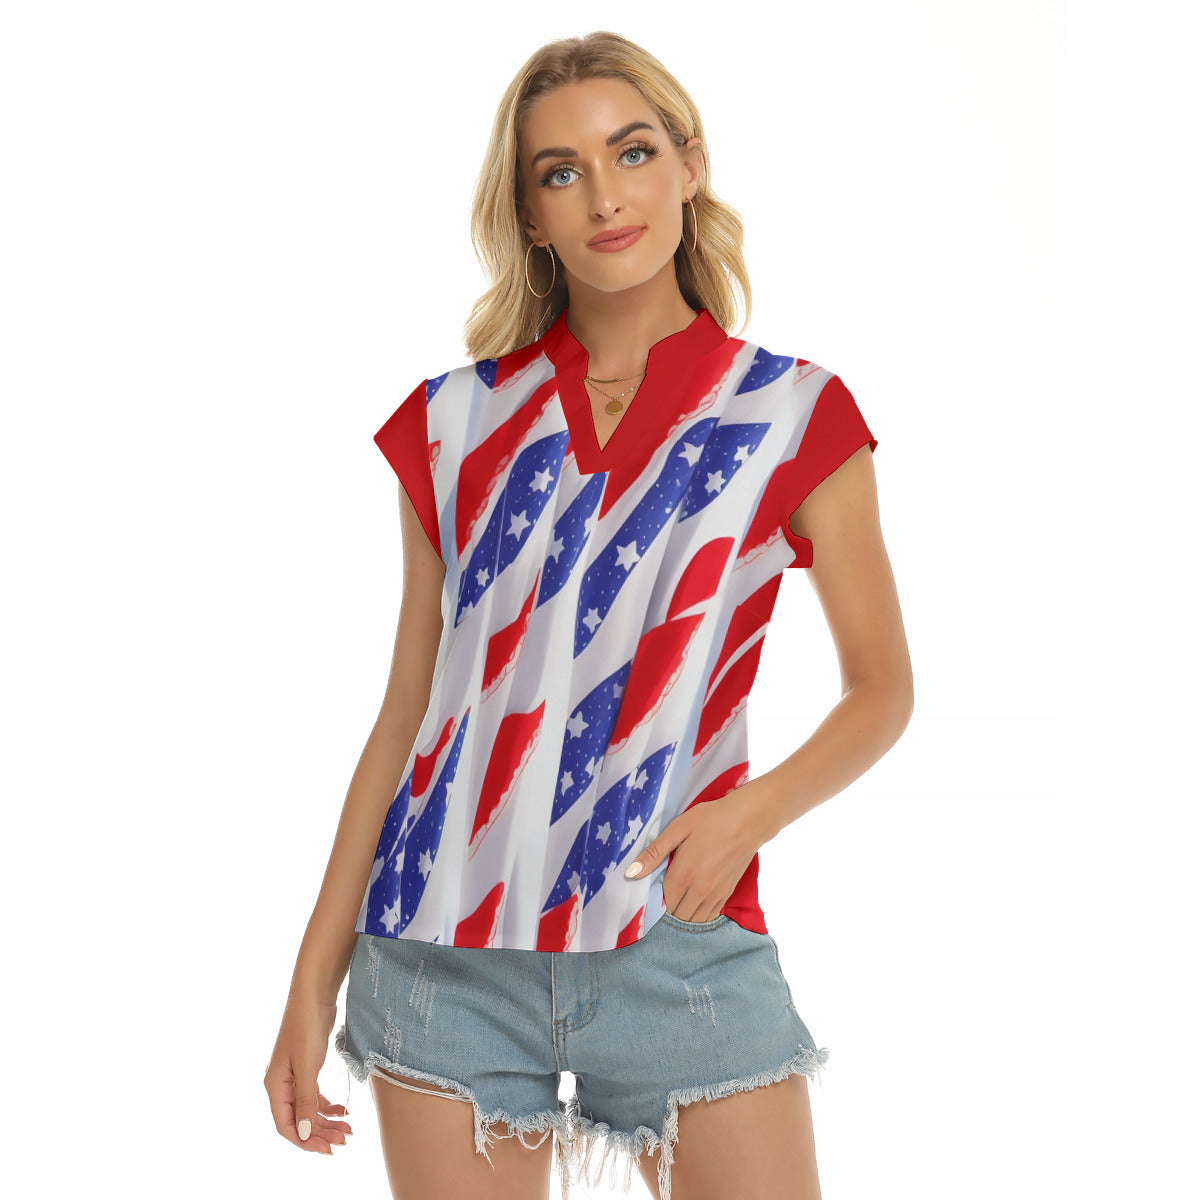 4th Too --Women's Stacked V-neck Short Sleeve Blouse